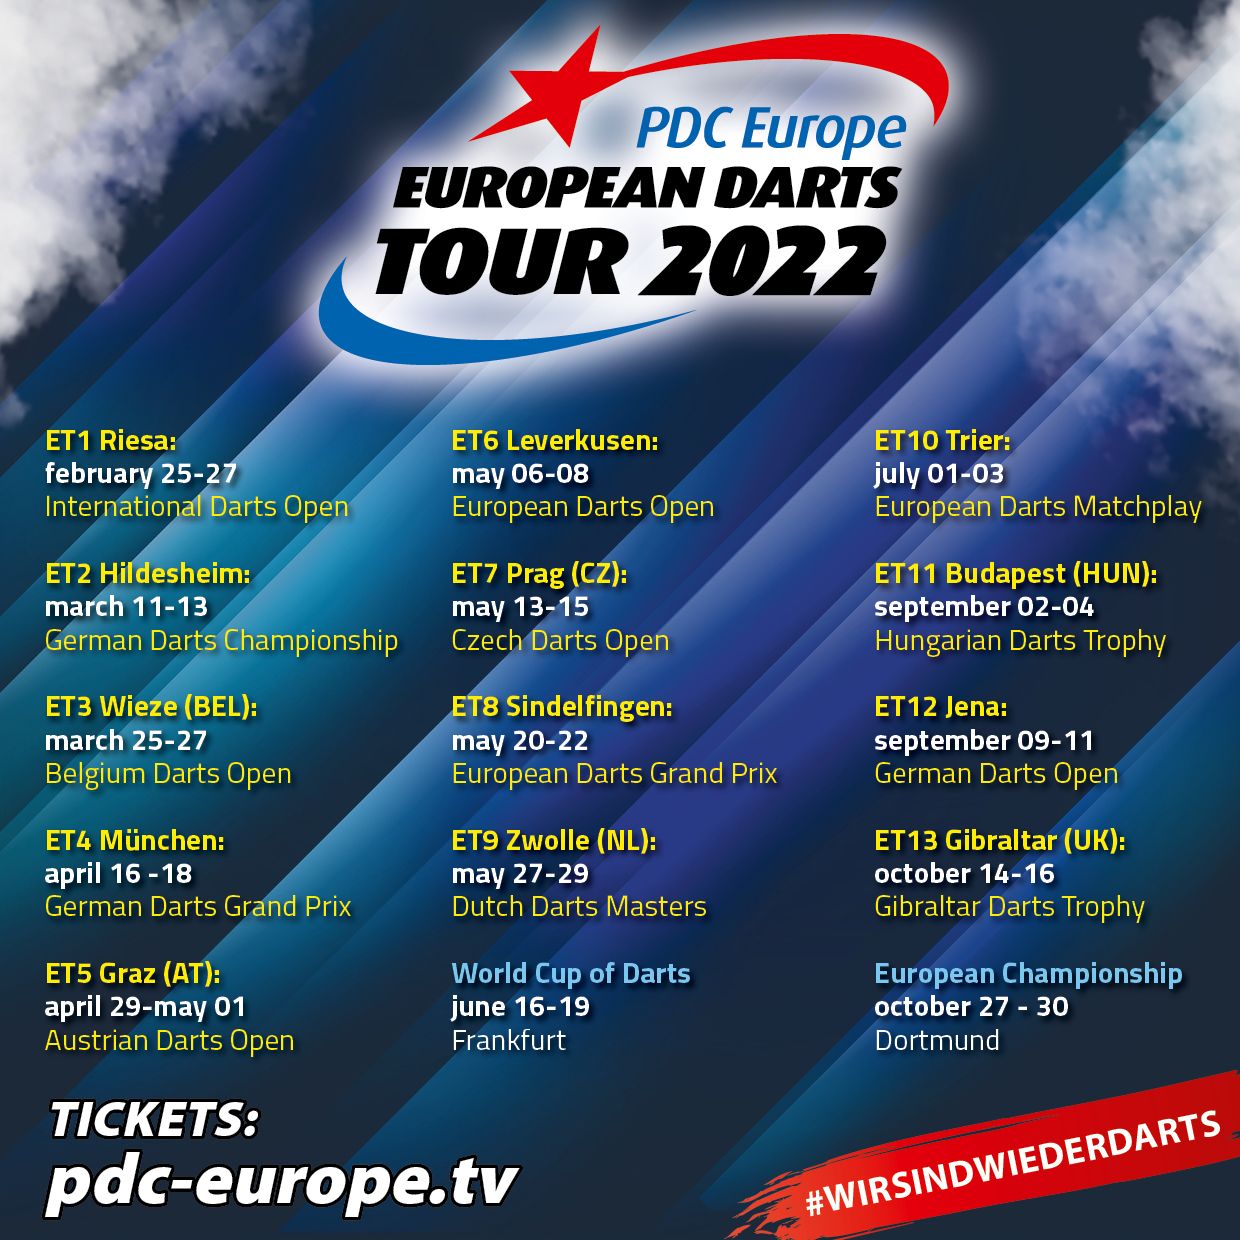 PDC Europe on Twitter: "The 2022 European Tour set!🎯🤩 The vast majority of tickets from the 2020 and 2021 European will remain valid for 2022. All current ticket holders will